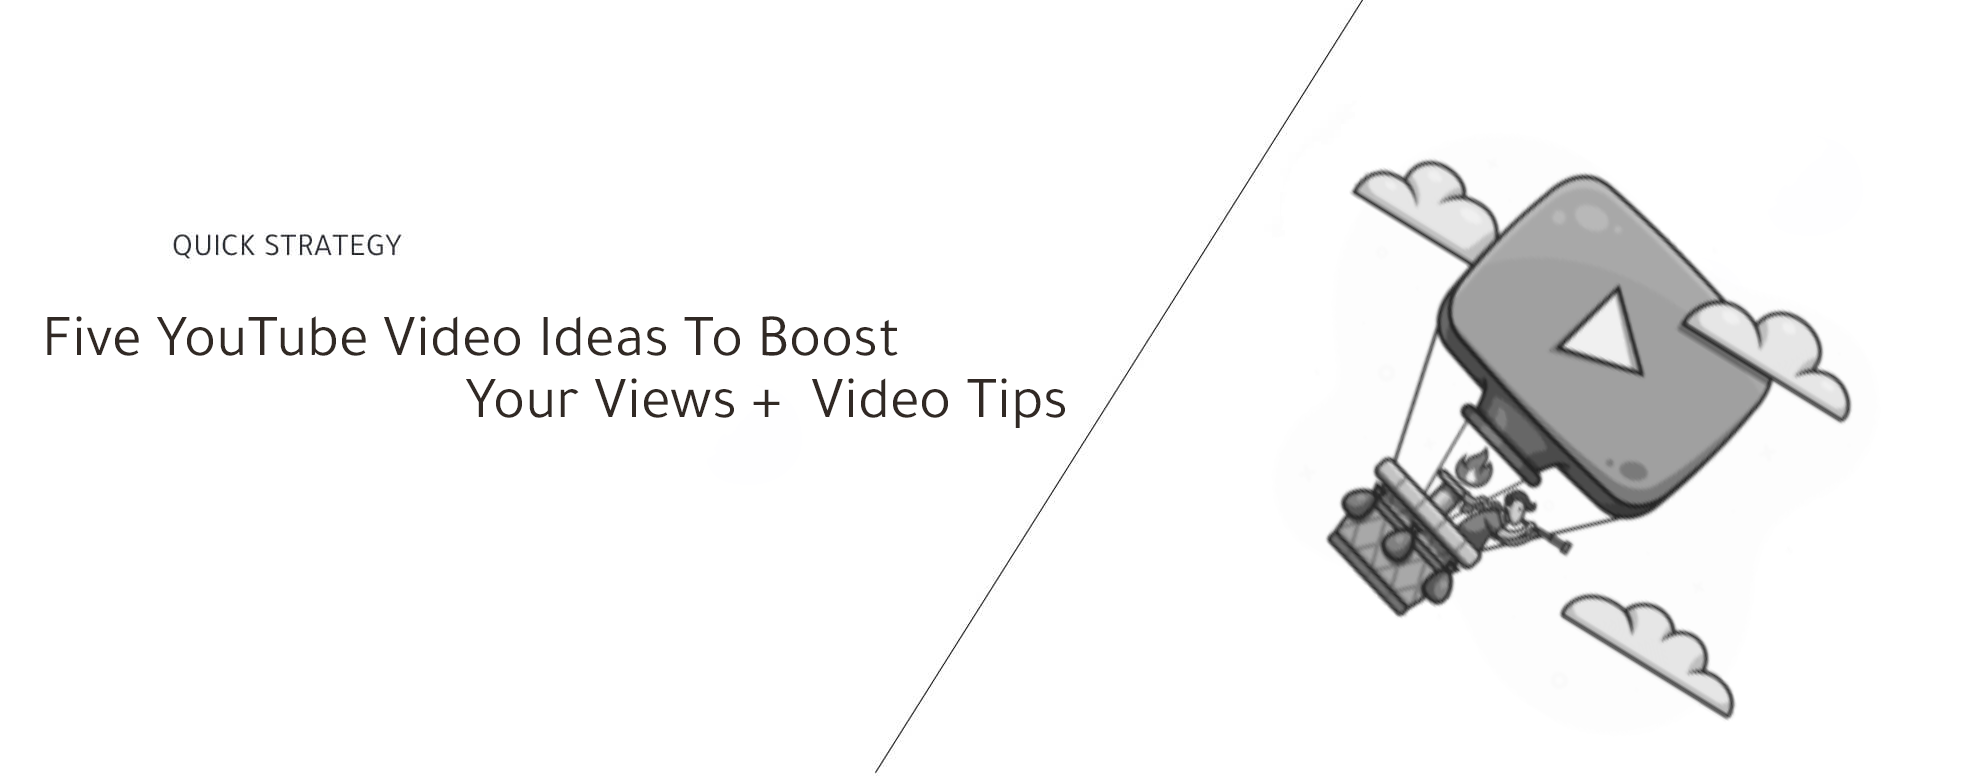 Five YouTube Video Ideas To Boost Your Views + Video Tips